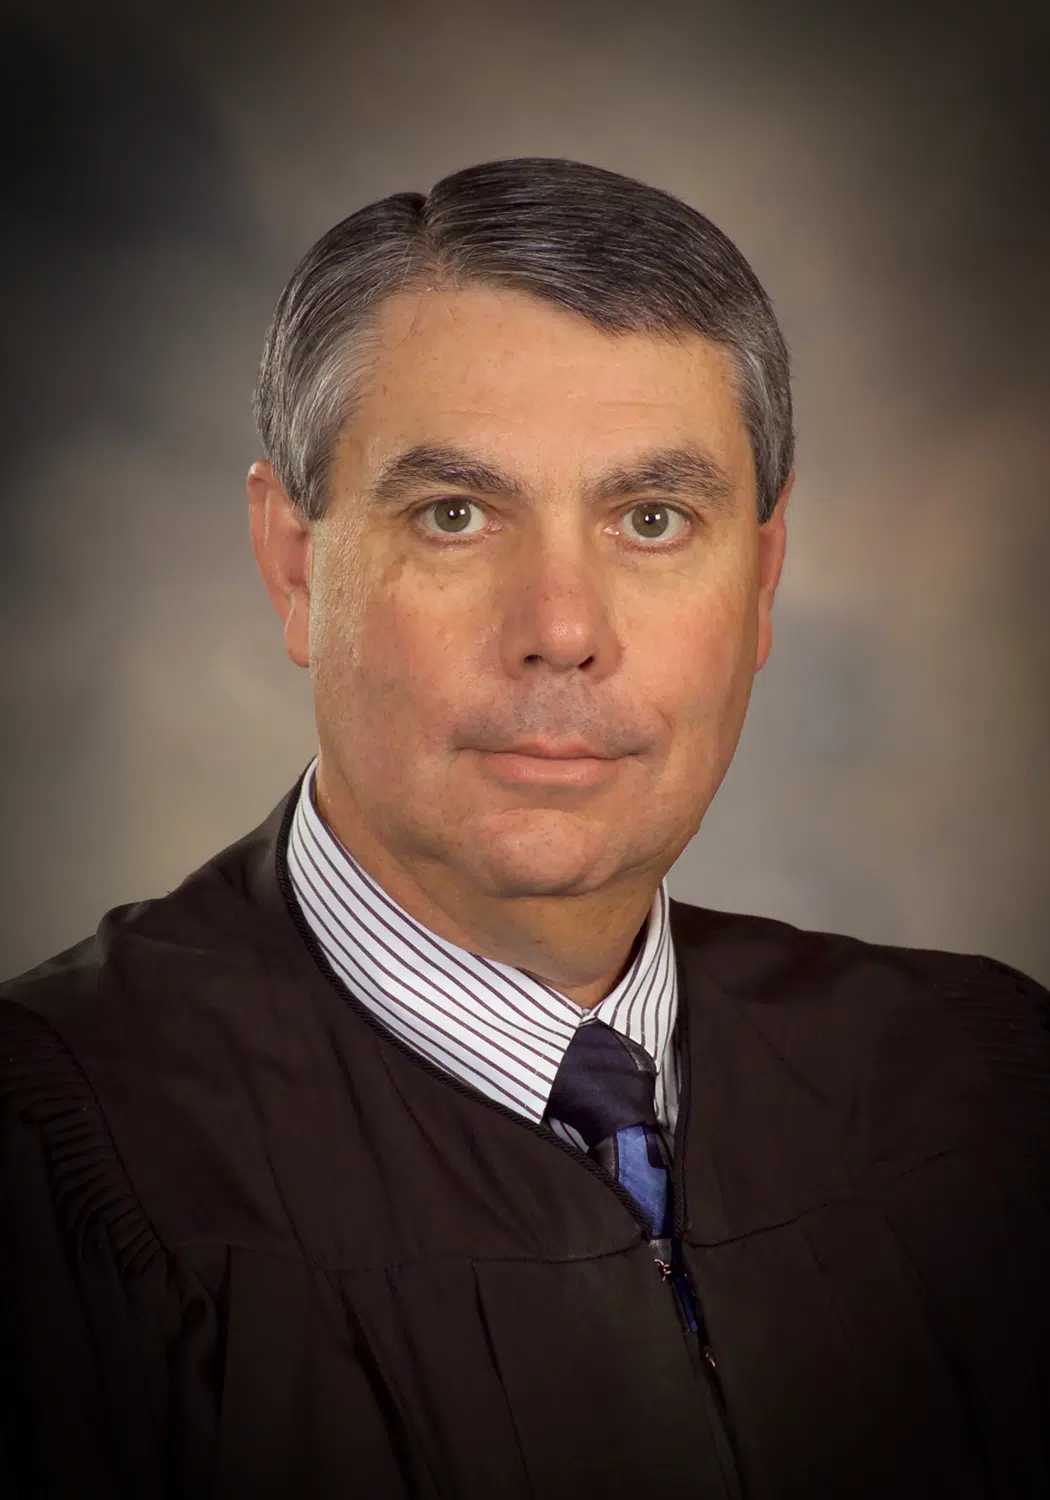 Wheeler looking forward to 'senior judge status' as part of official retirement this fall